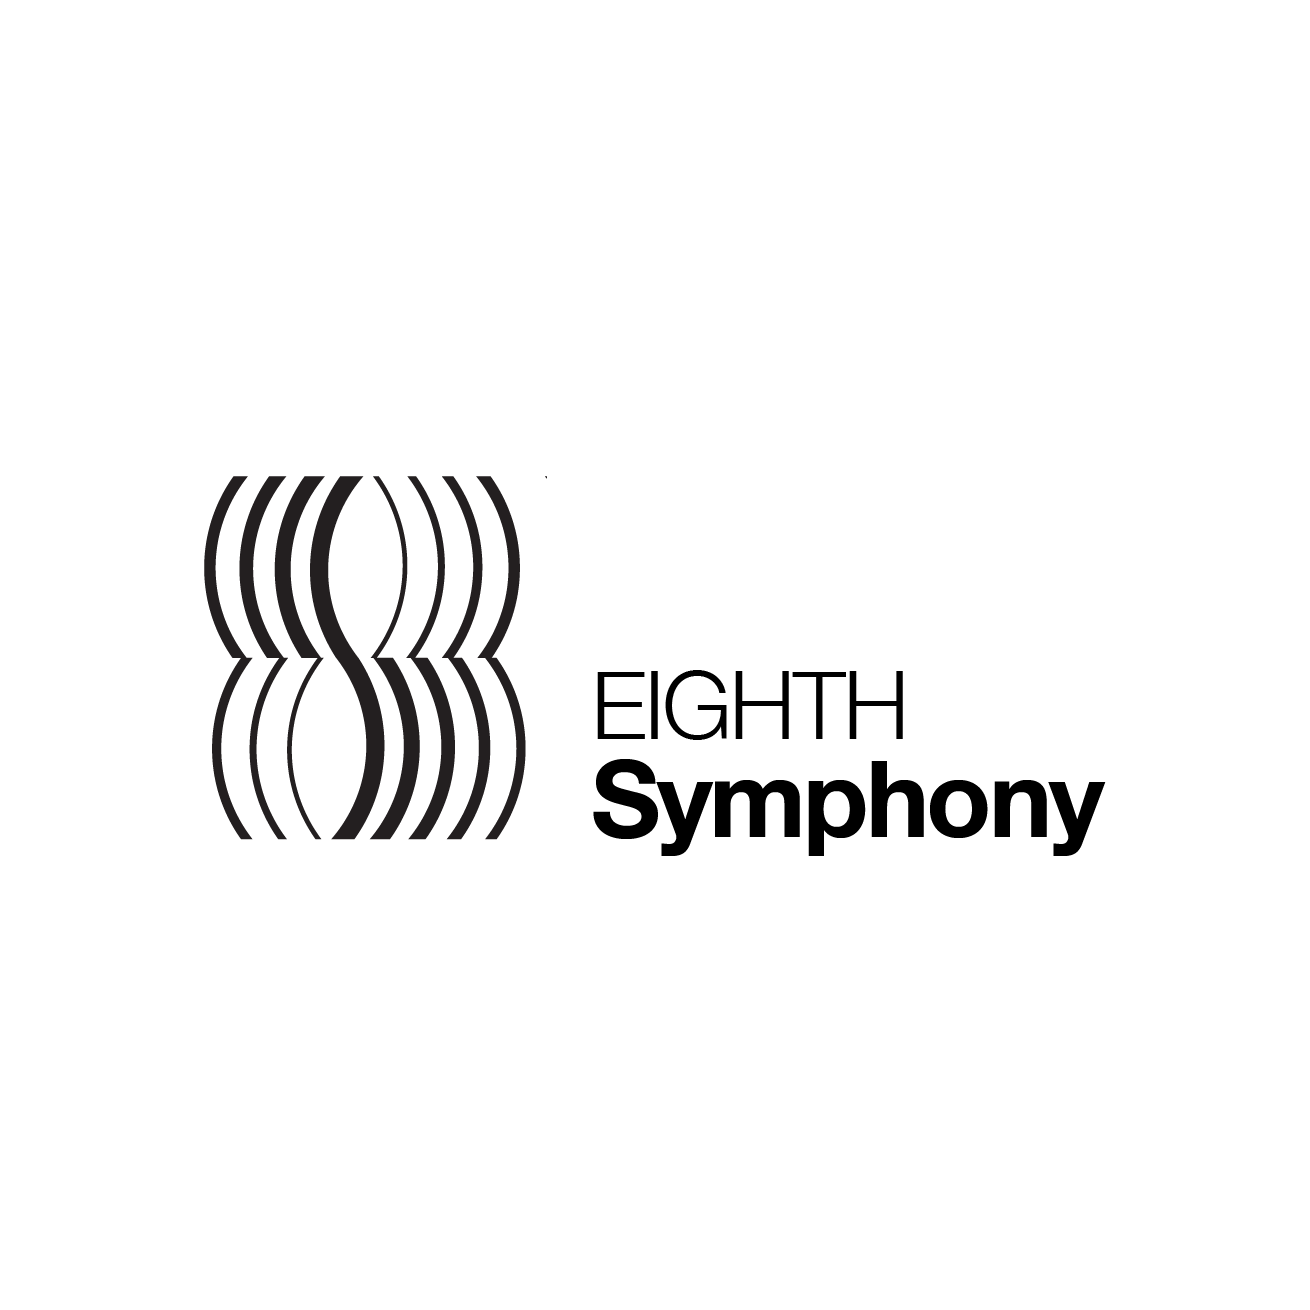 Eighth Symphony  logo design by logo designer Fattah Setiawan for your inspiration and for the worlds largest logo competition